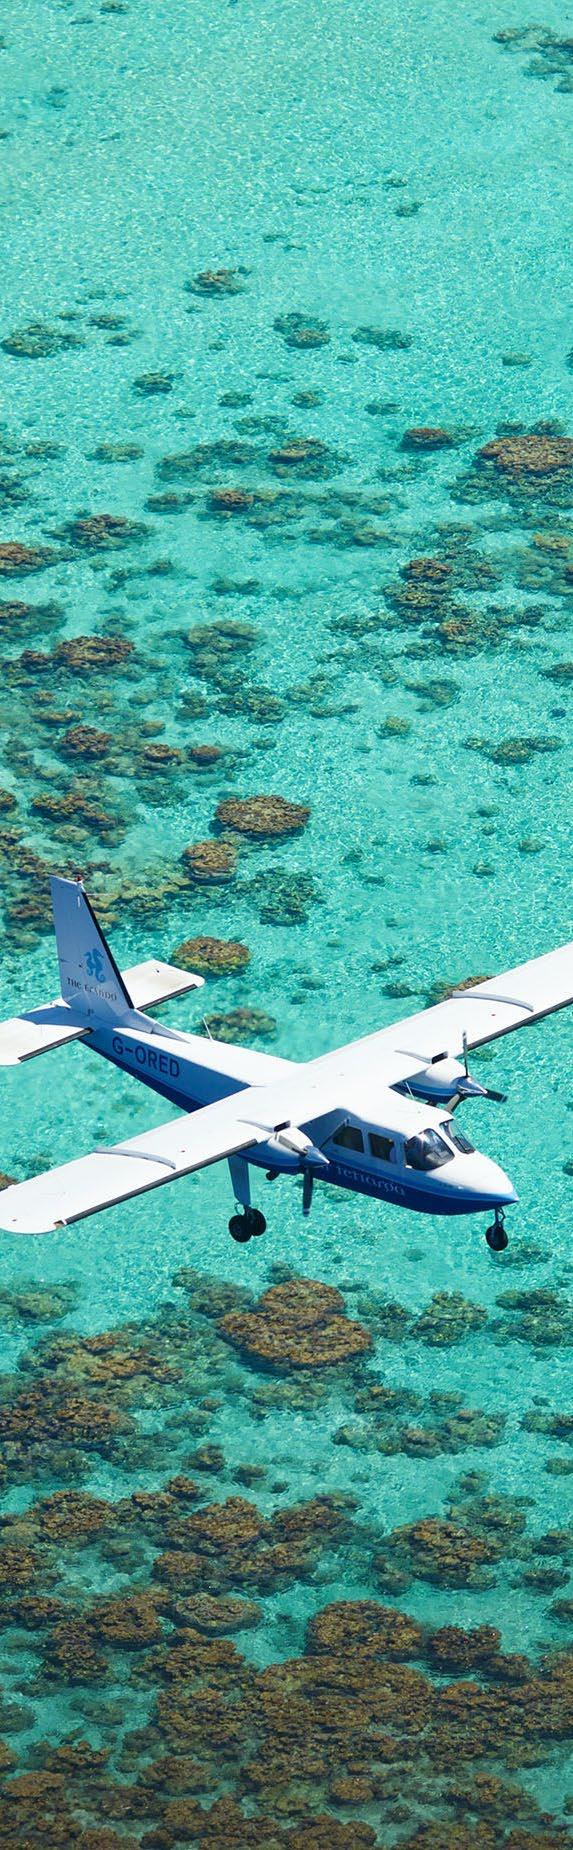 Air Tetiaroa Fares Tahiti/Tetiaroa rates valid for 2 consecutive nights booked at The Brando ADULT and child from 12 years old Round trip per person 450 Euros* CHILD from 2 to 11 years old Round trip